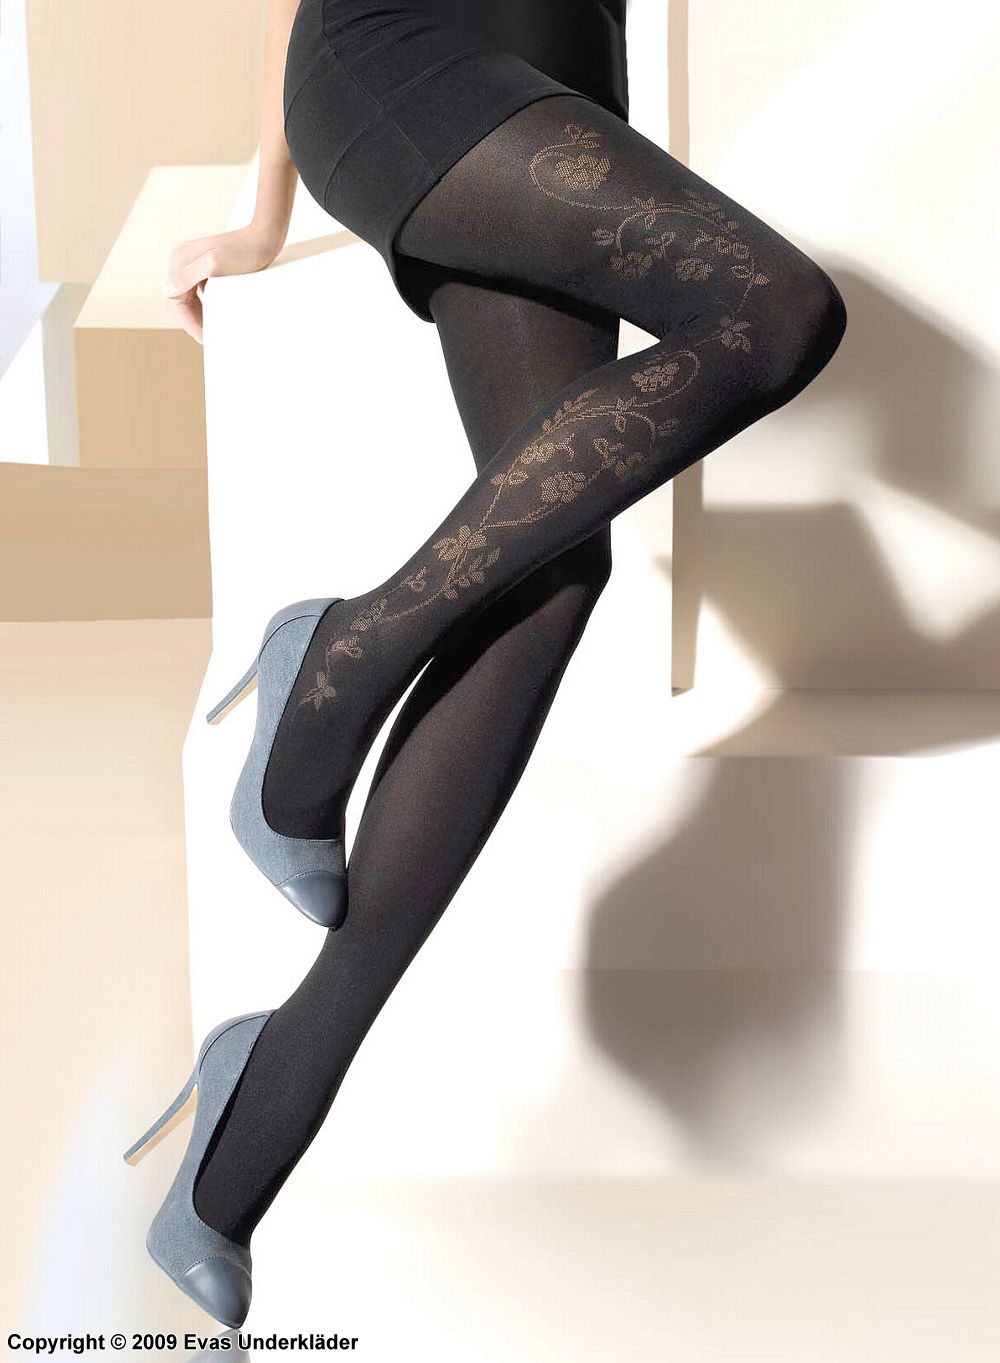 Tights with flowers on leg